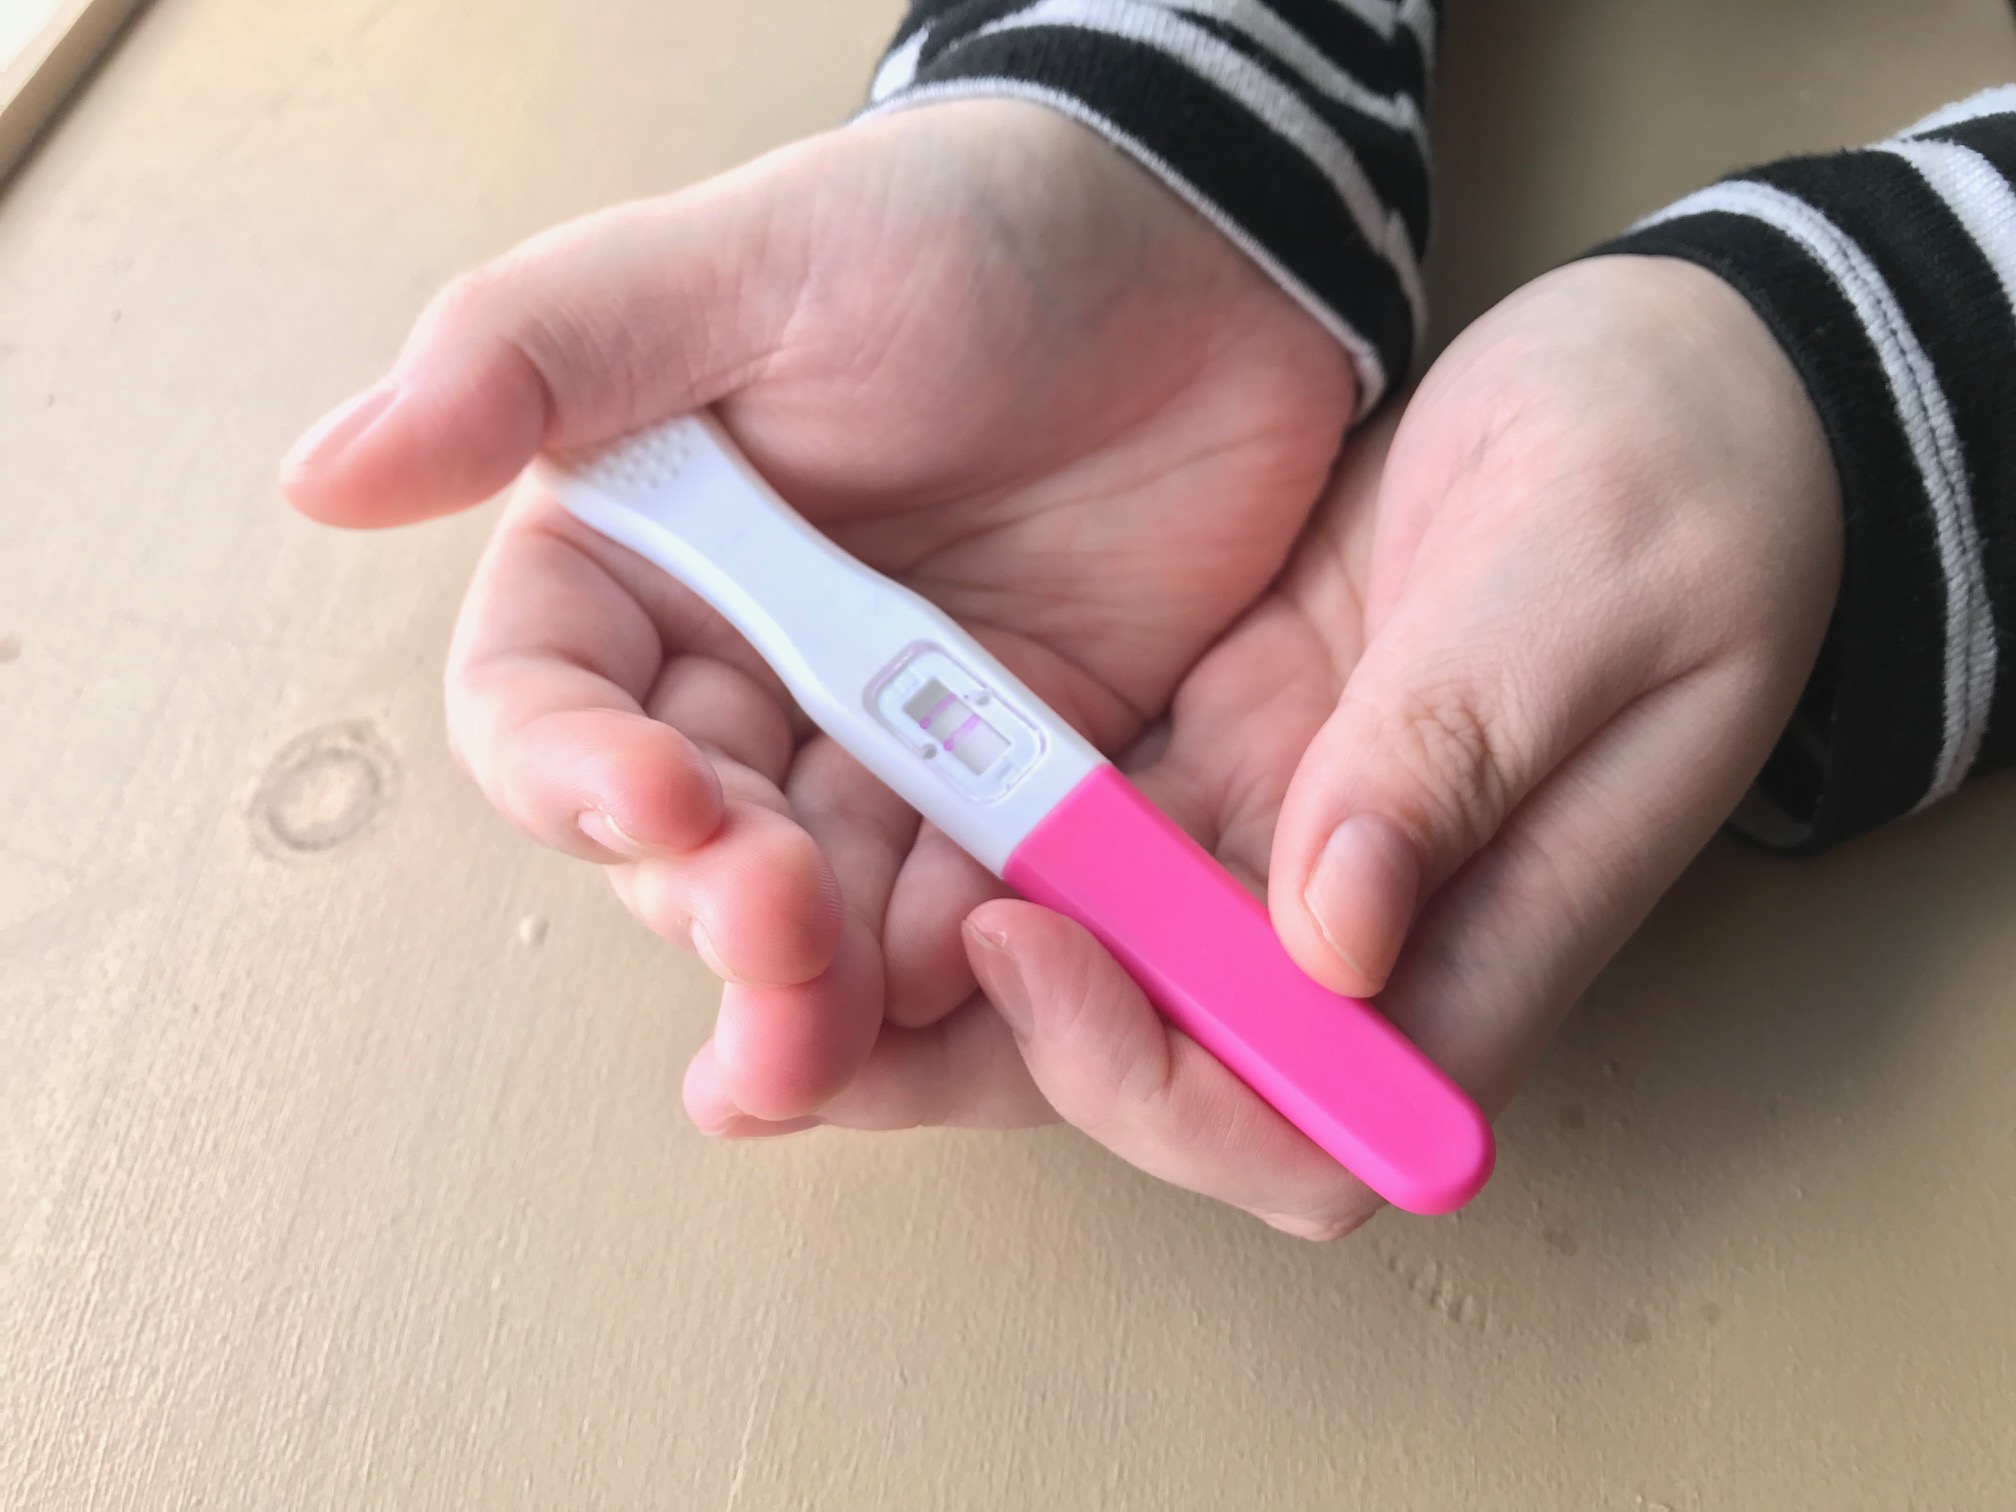 A woman's hands hold a pregnancy test.